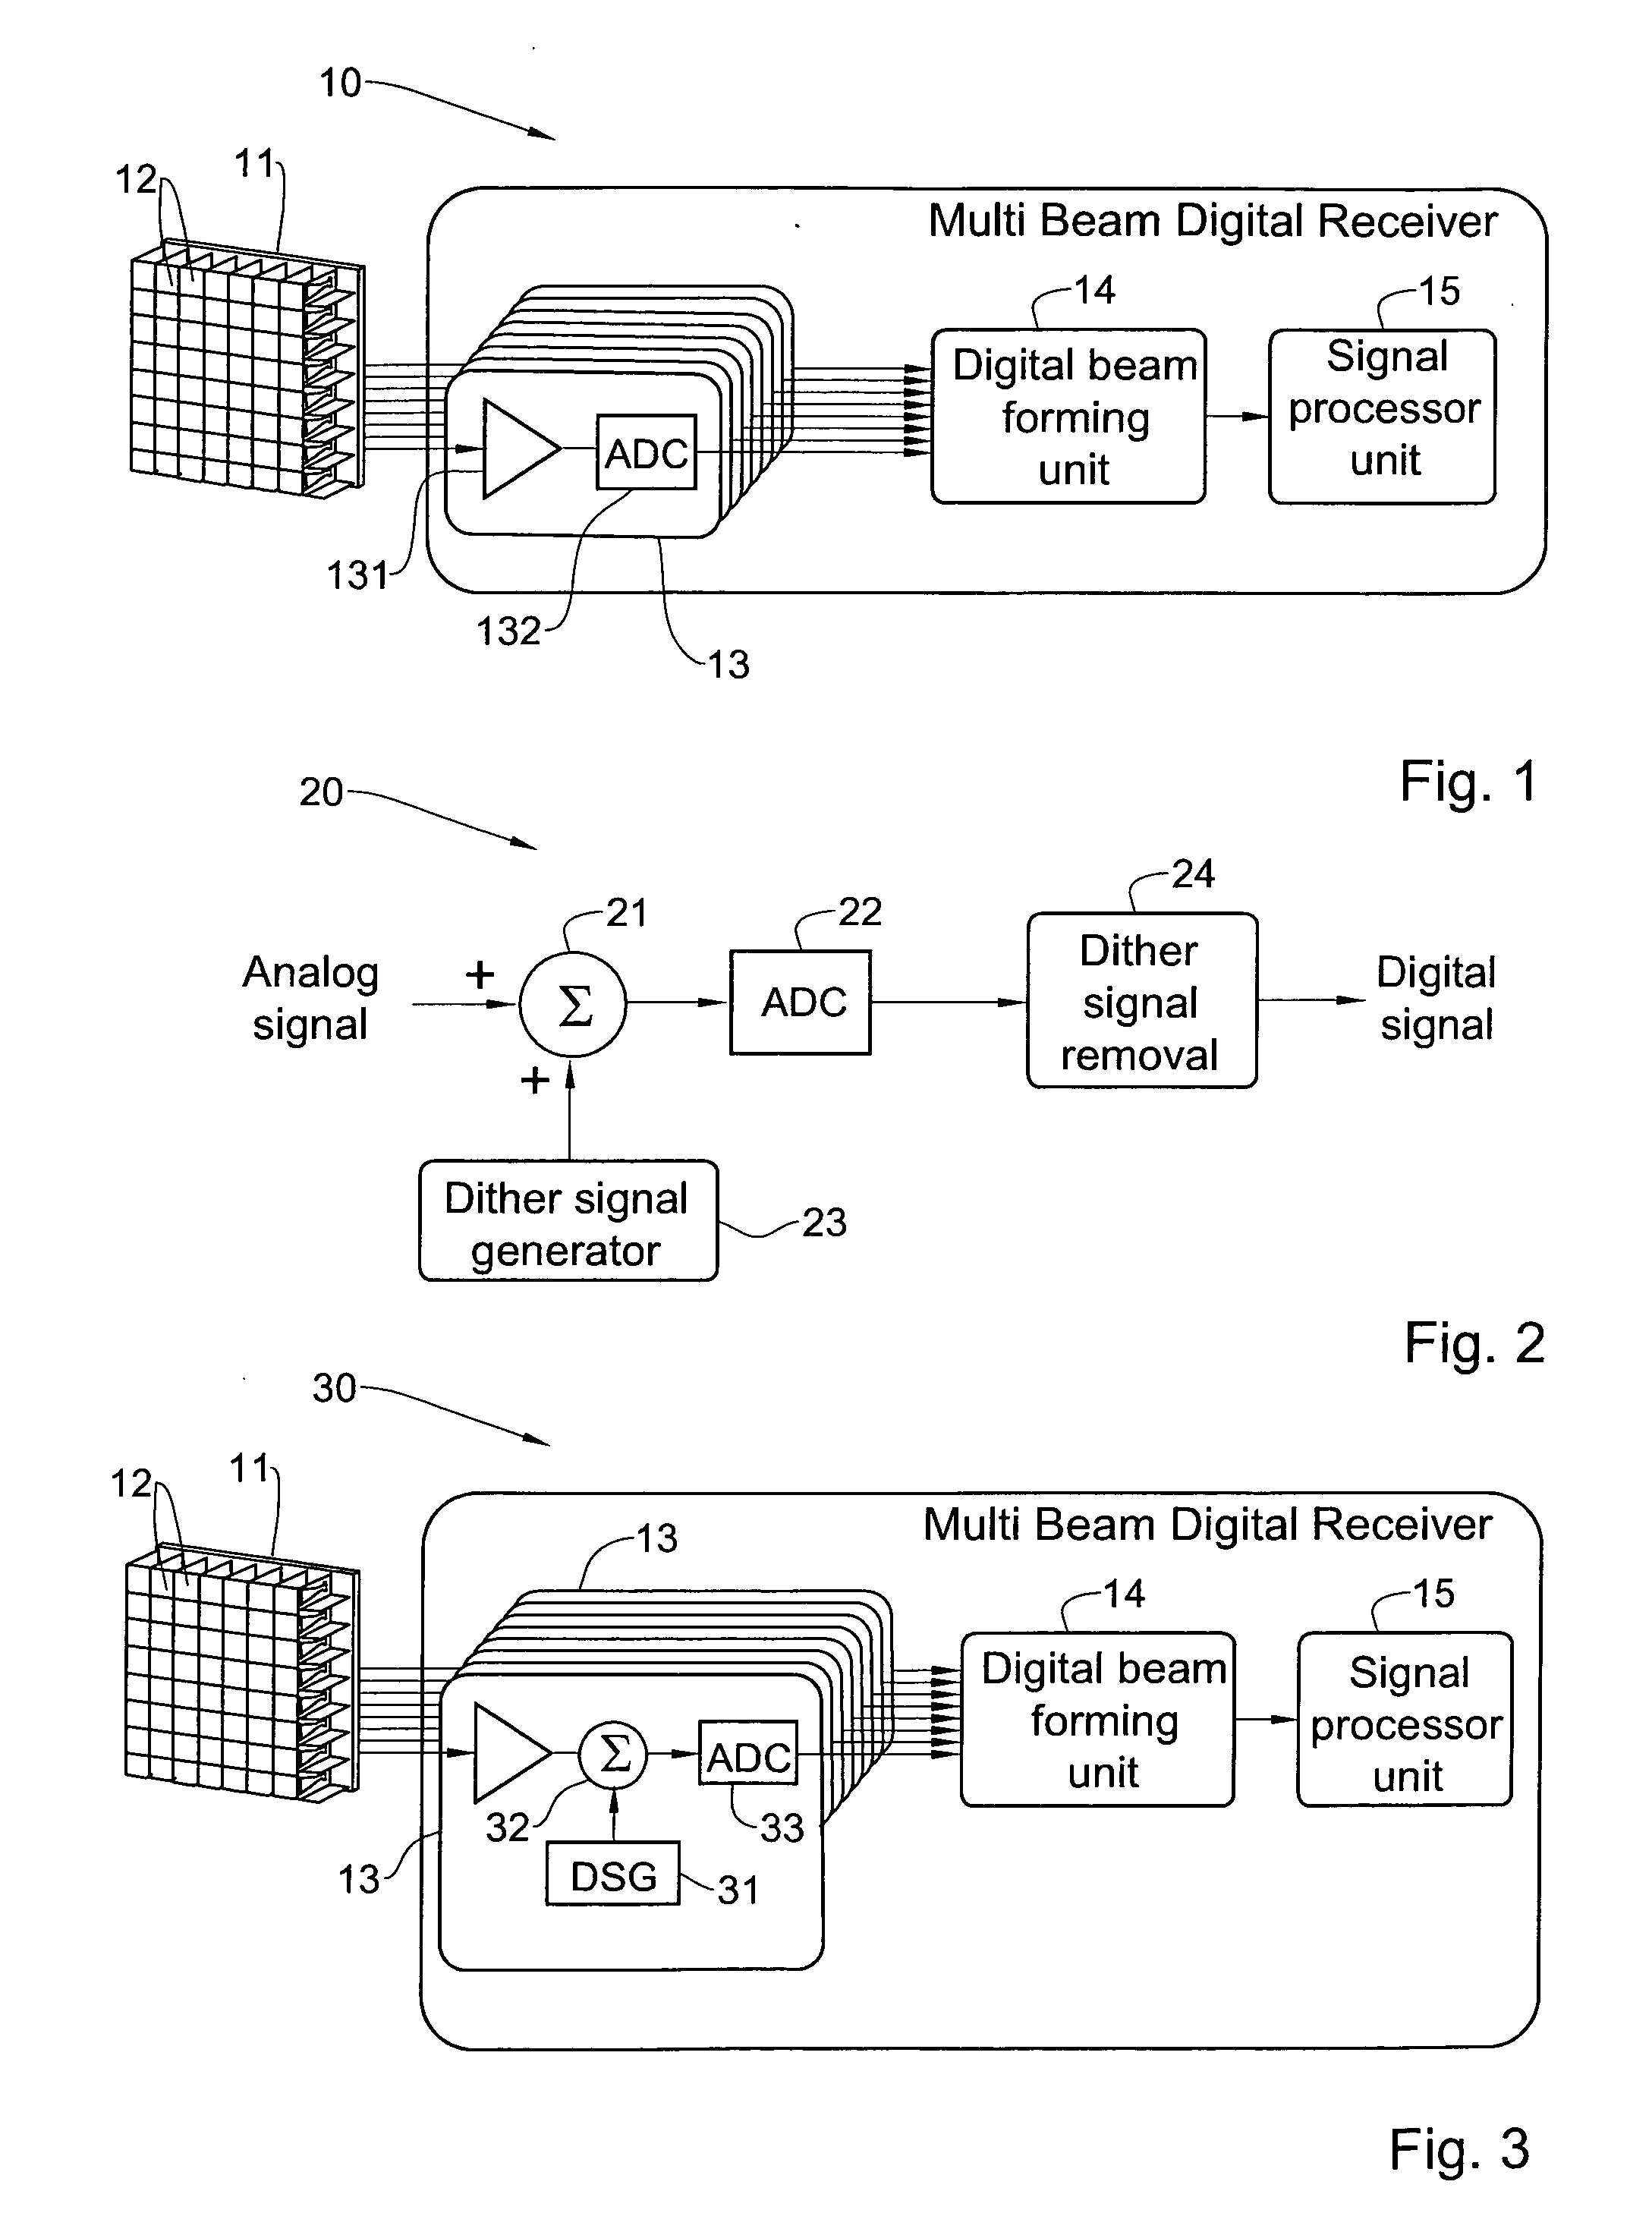 System and method for enhancing dynamic range of a beamforming multi-channel digital receiver